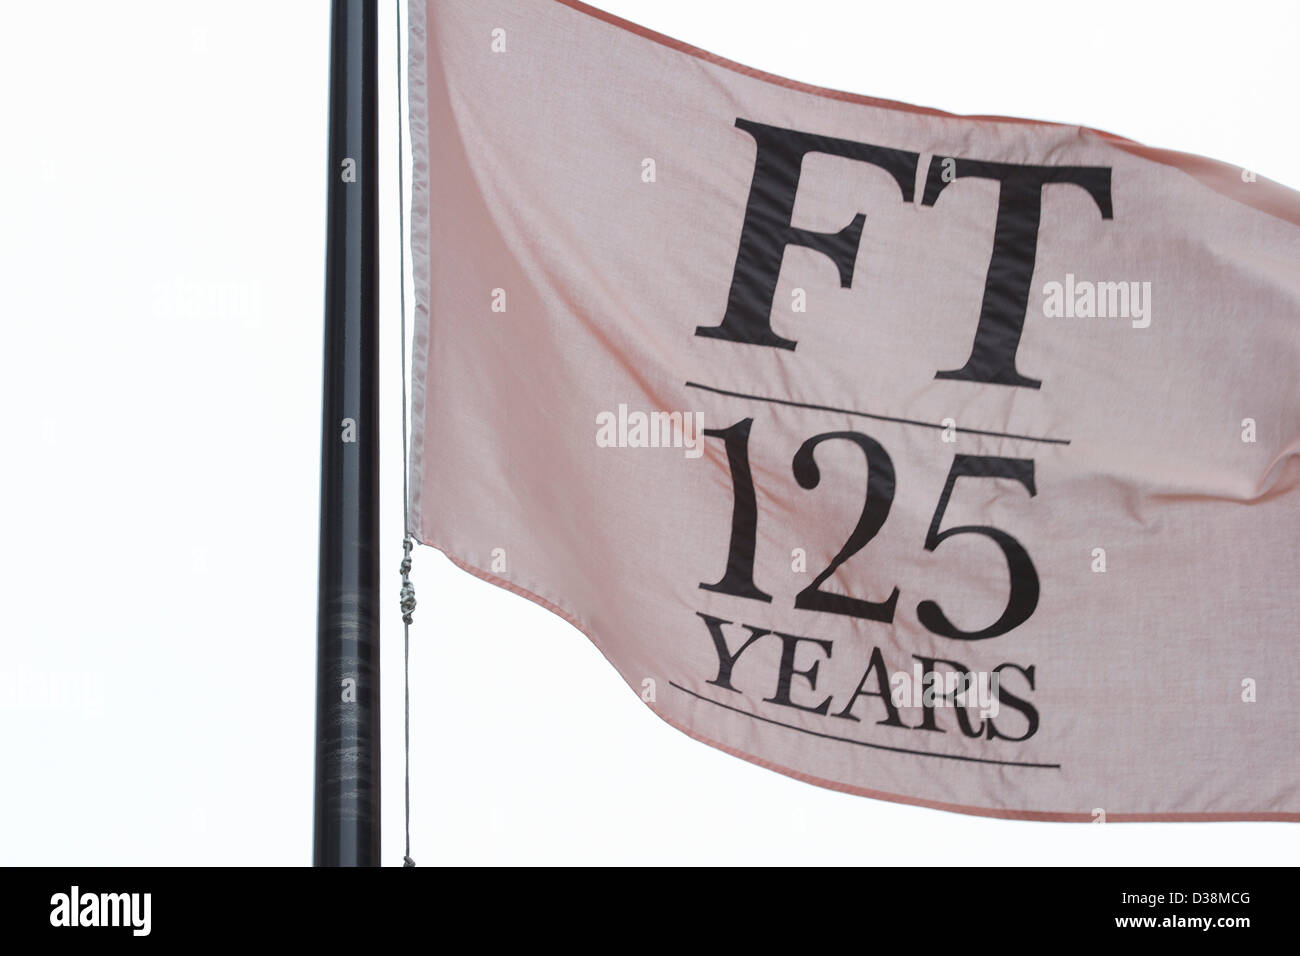 London, UK. 13th February 2013. A special flag celebrates the FT's 125th anniversary.The Financial Times celebrates its 125th anniversary with a special edition. Amer Ghazzal / Alamy Live News Stock Photo